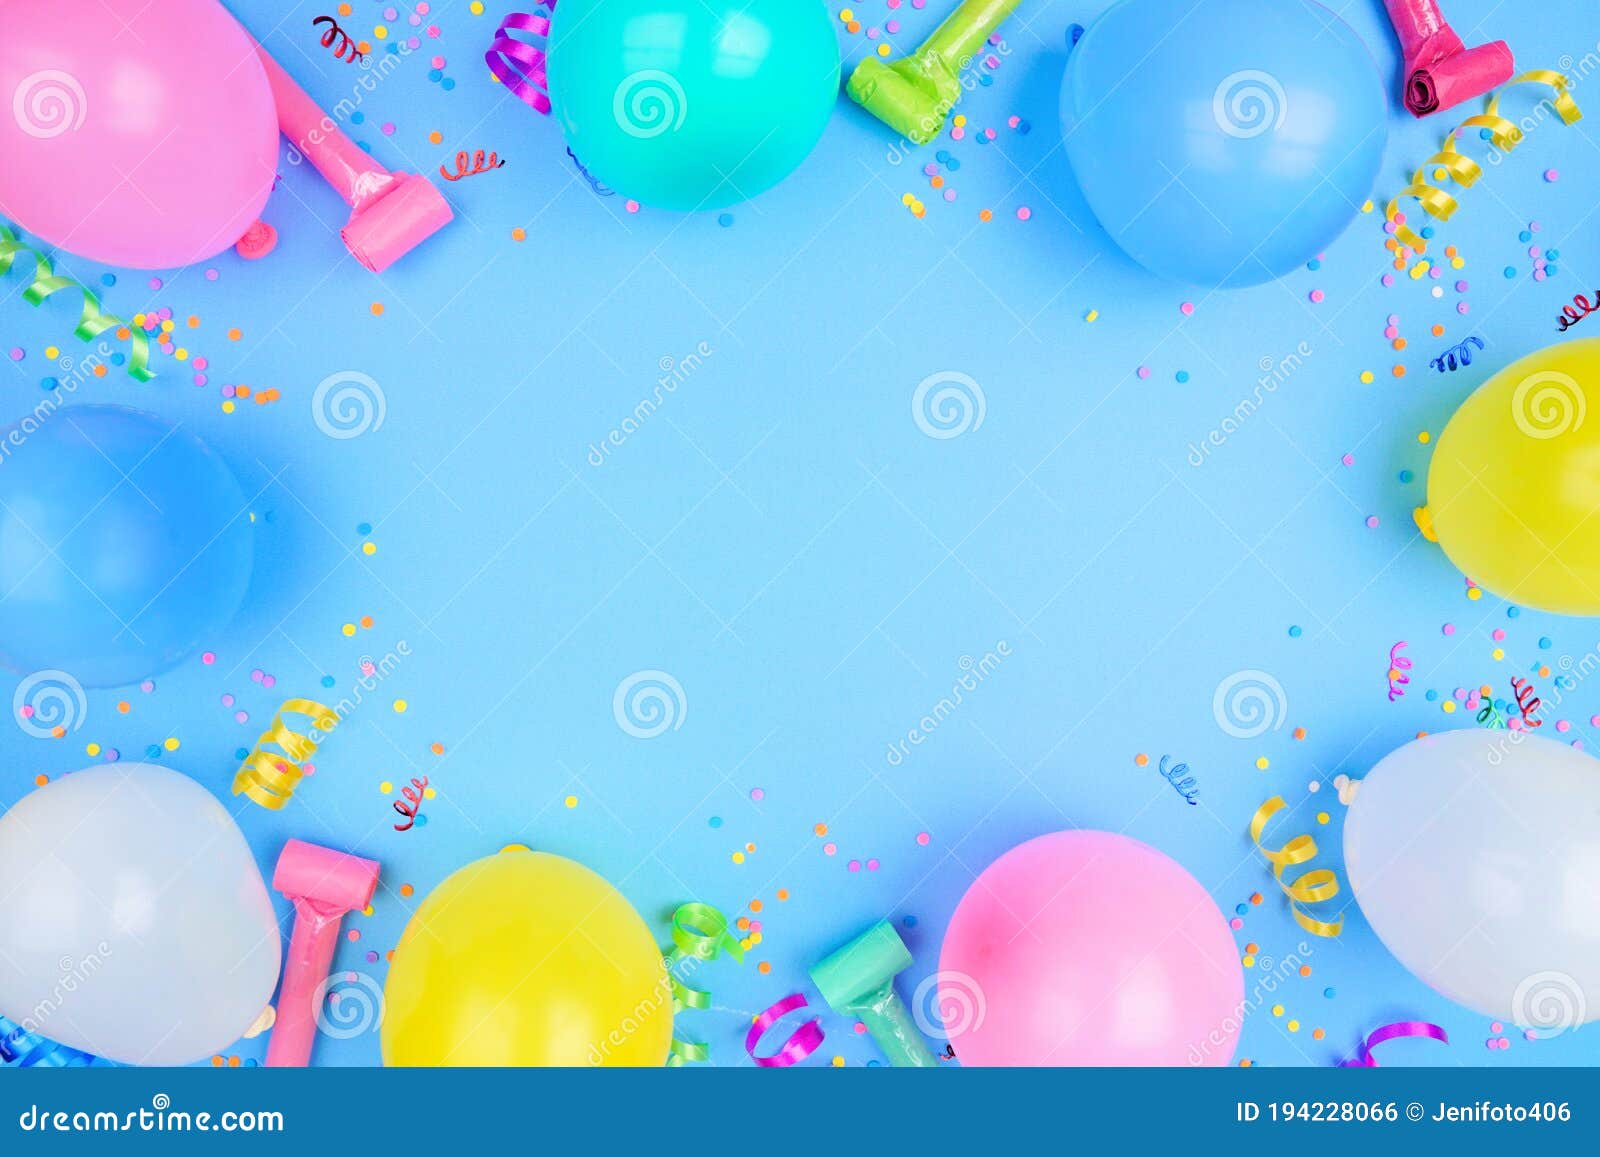 Birthday Party Frame on a Blue Background View with Balloons, Streamers and  Confetti Stock Photo - Image of blower, background: 194228066